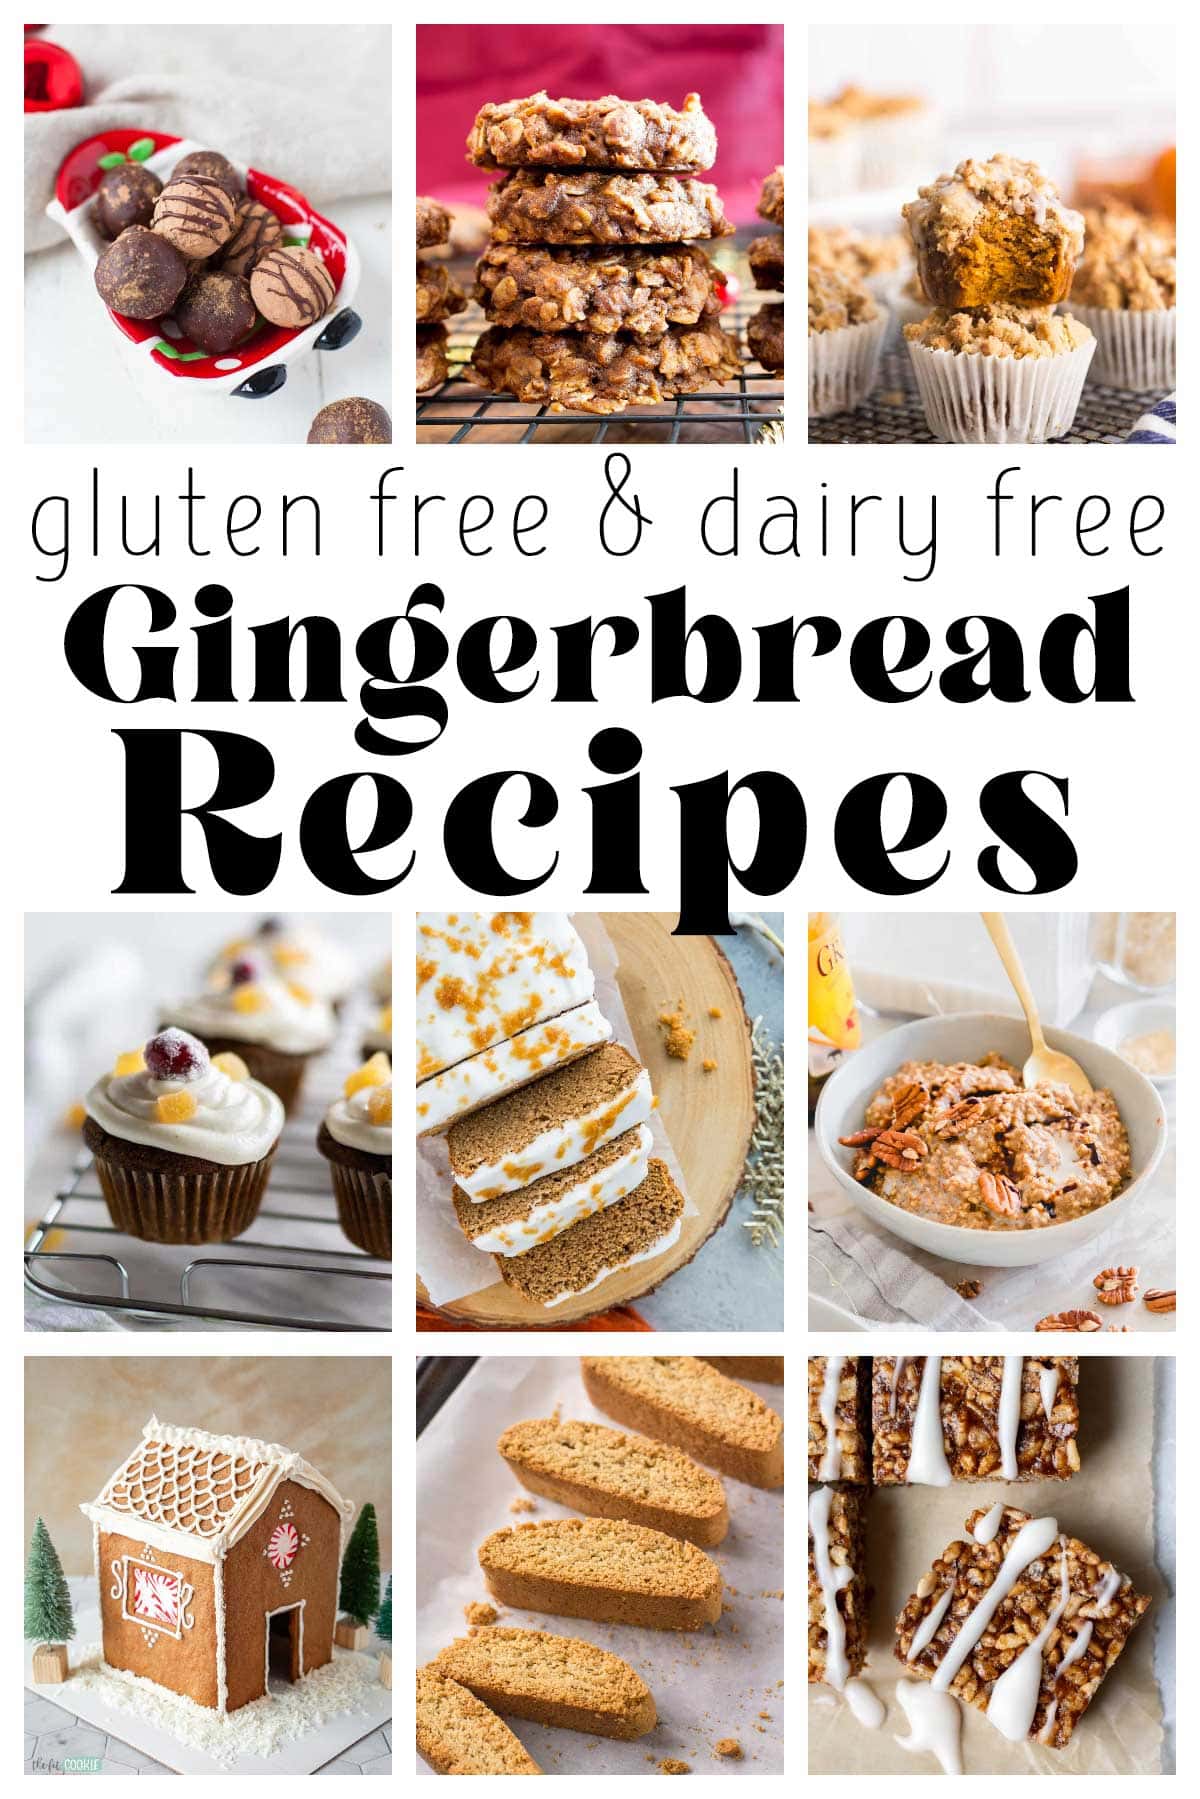 image collage of gingerbread flavored recipes with text overlay